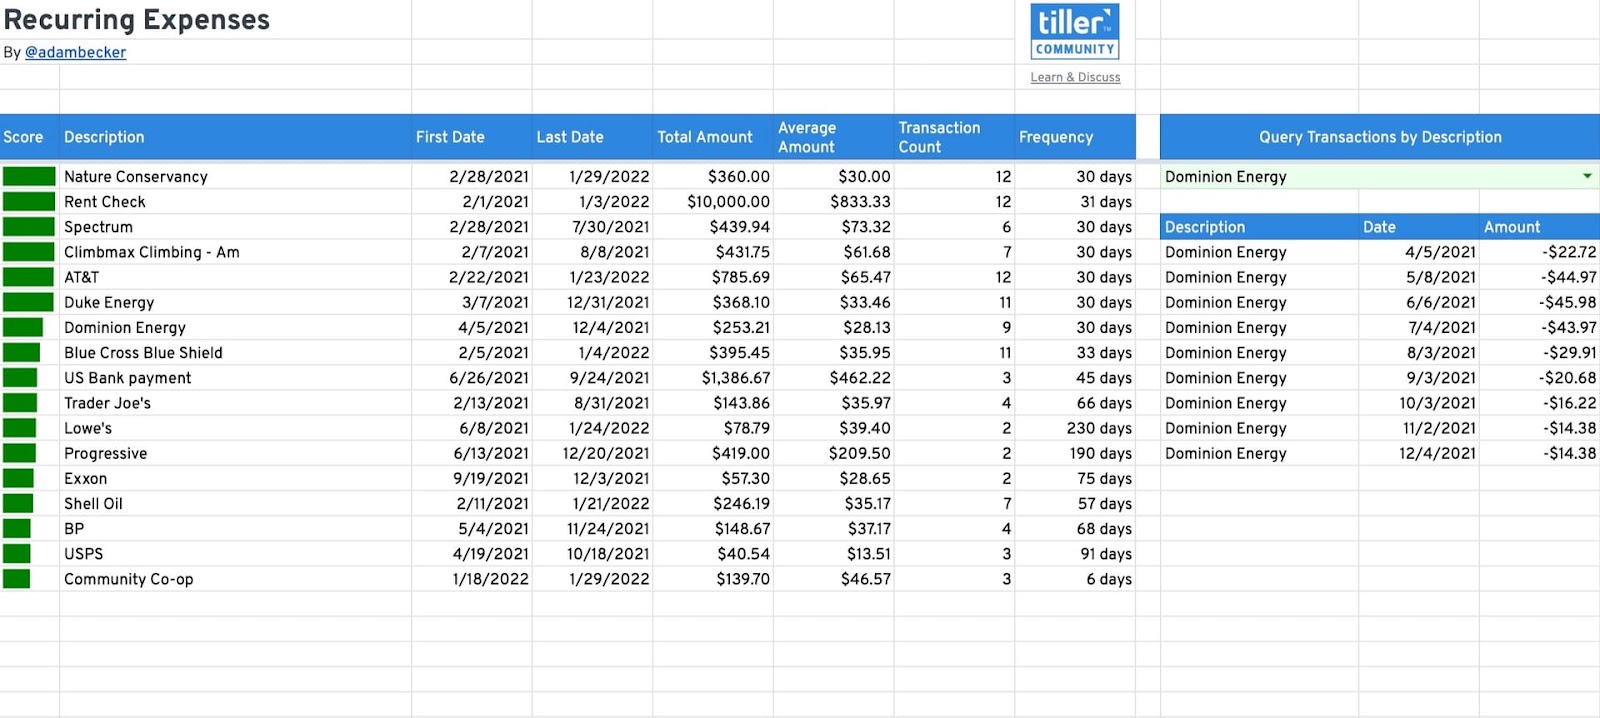 Image depicting expense tracking for business